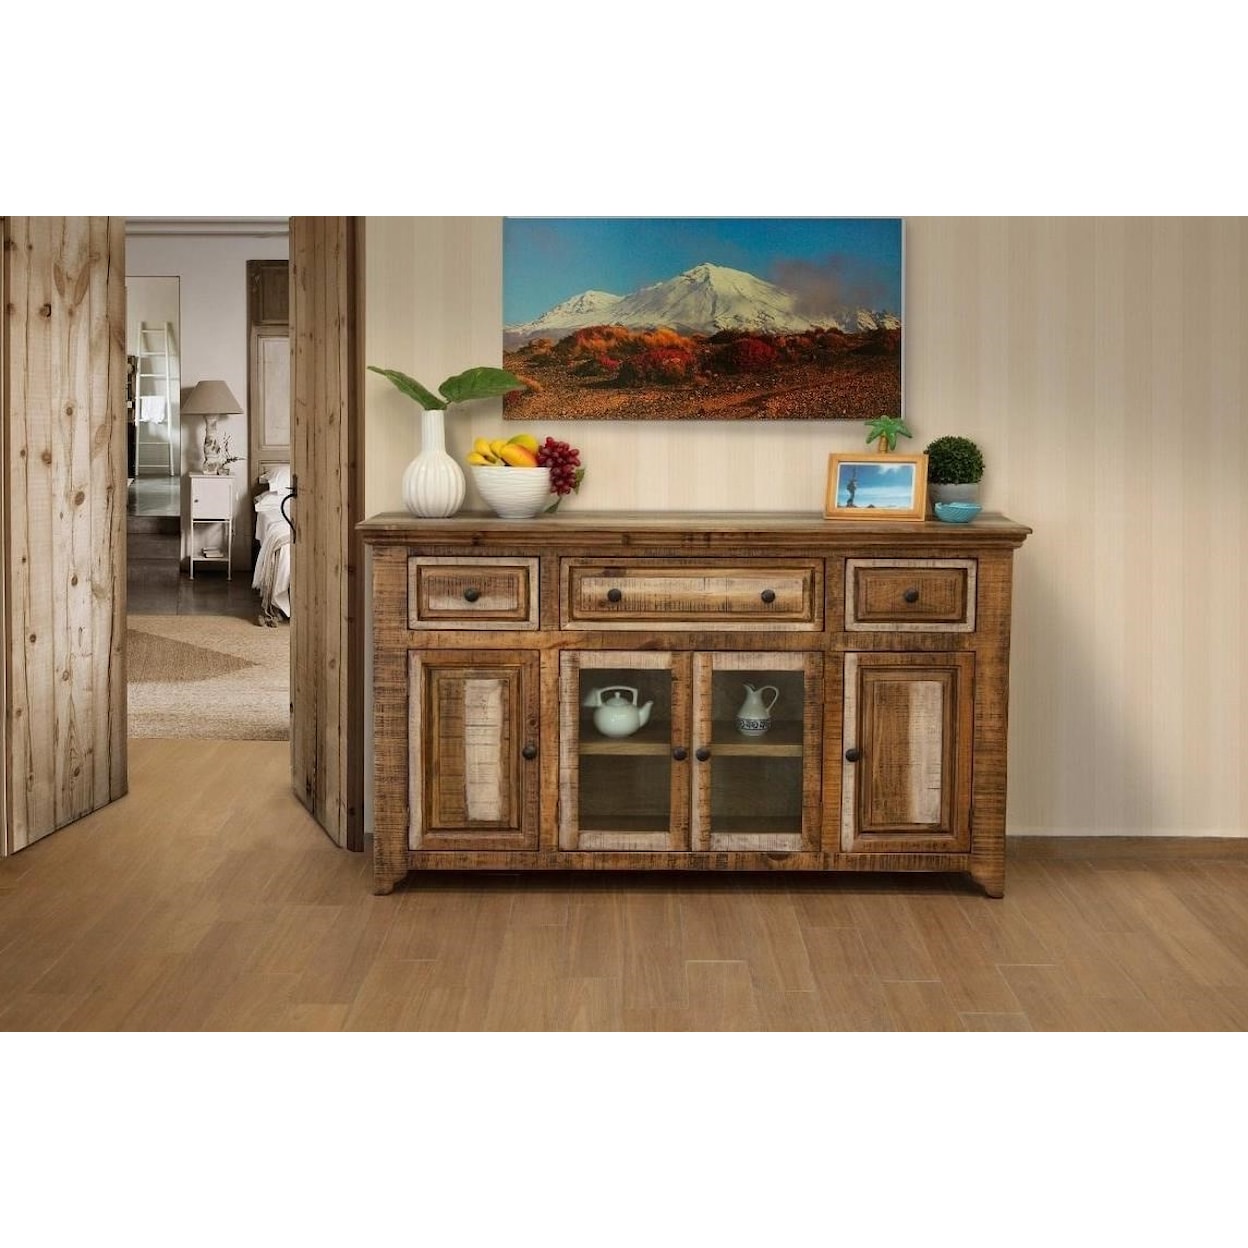 International Furniture Direct Marquez Console with 3 Drawers and 4 Doors